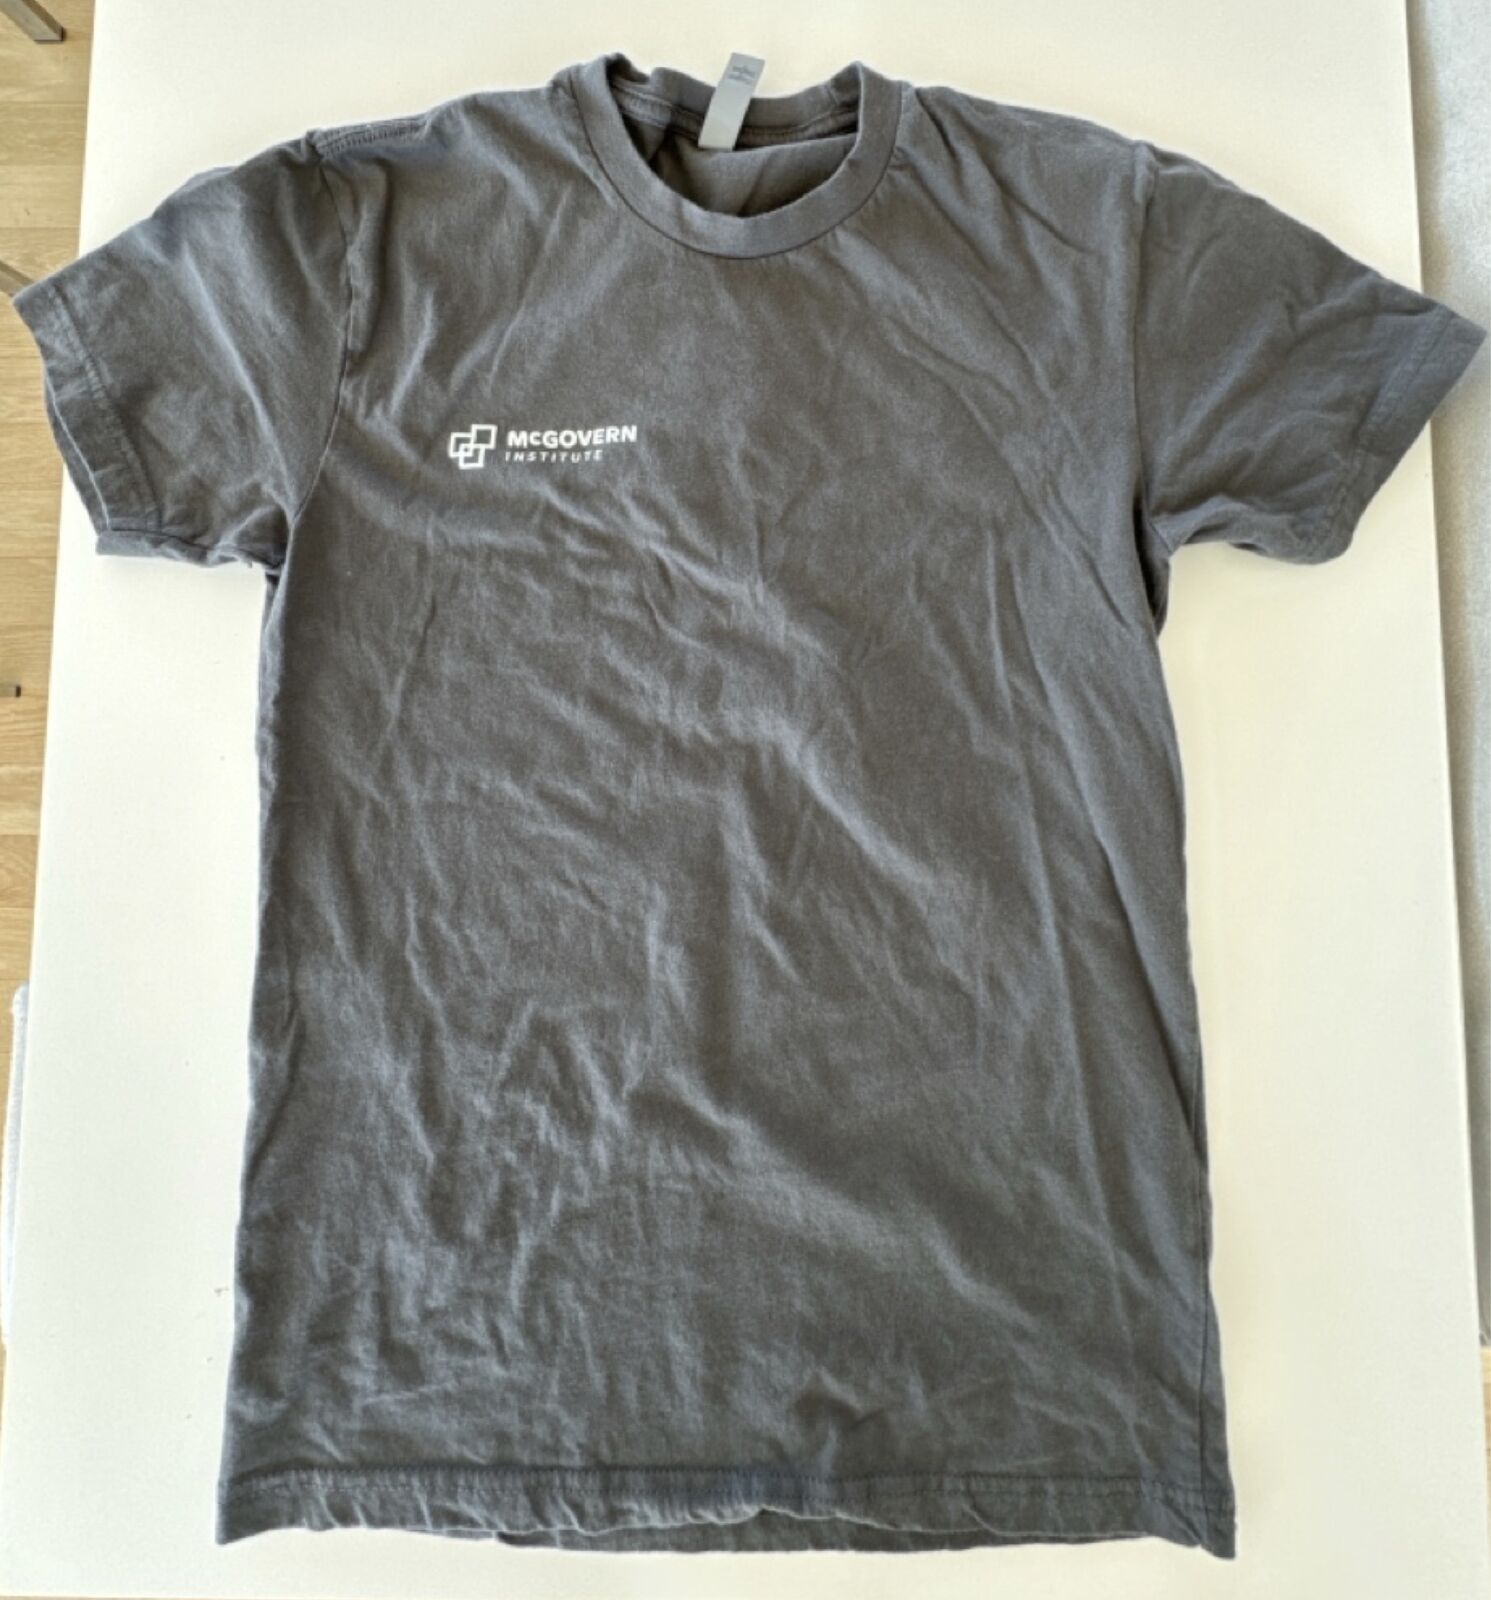 t-shirt MIT McGovern Institute Neurons That Fire Together Wire Together x-small